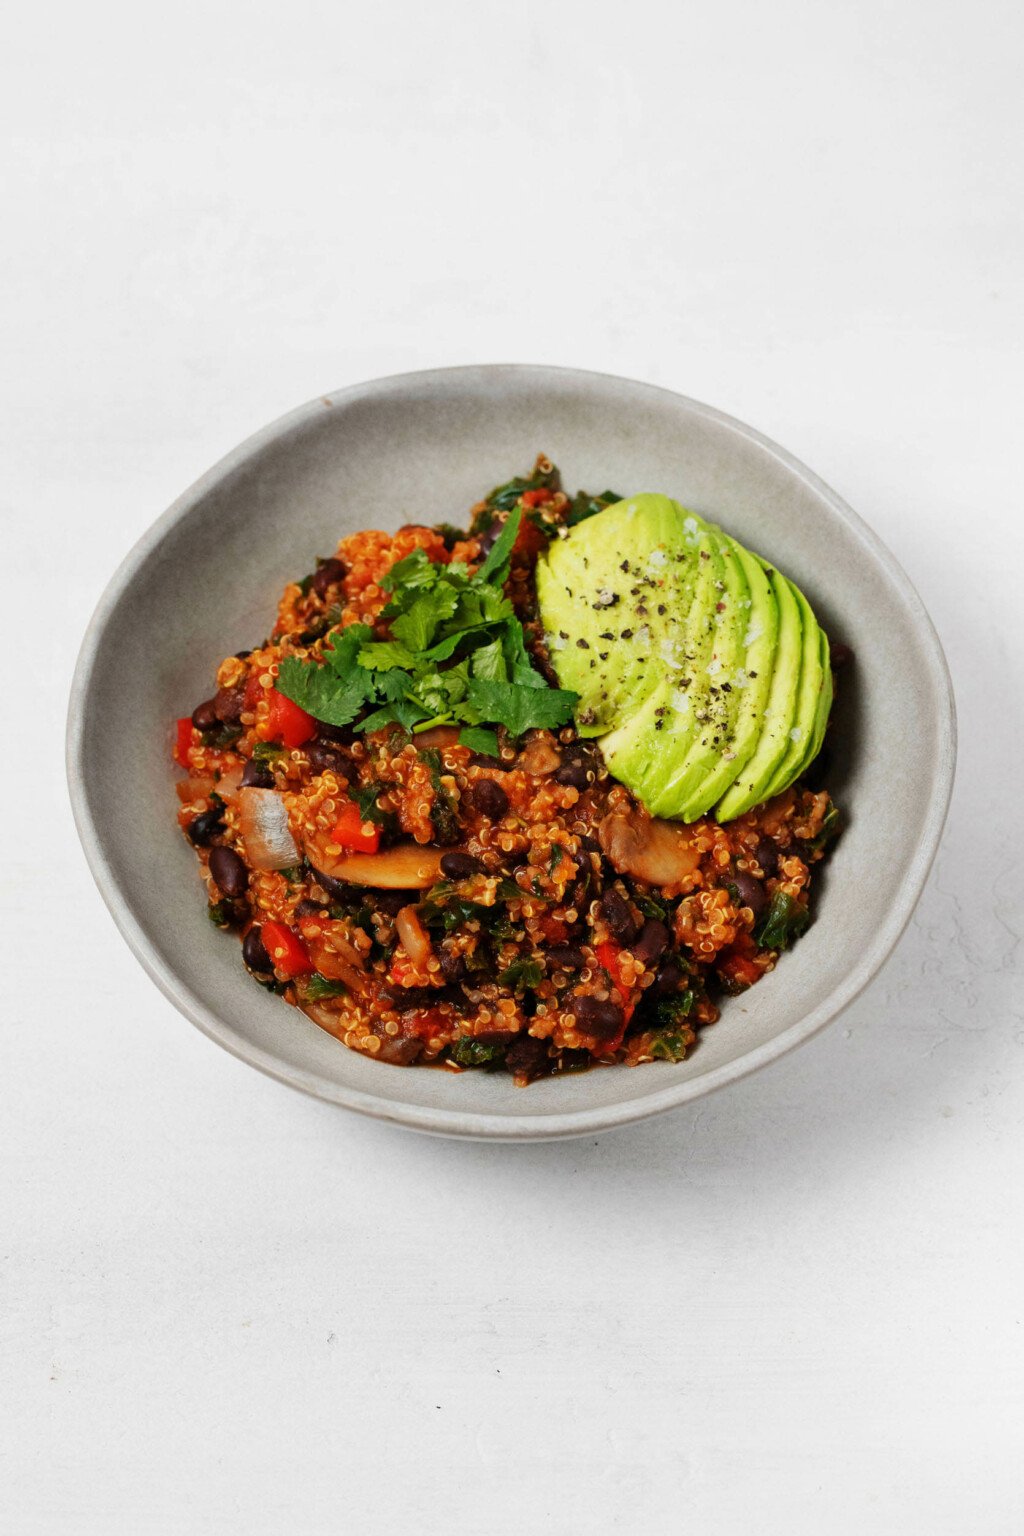 Vegan quinoa black bean chili is served in a round, white dish. It's topped with slices of avocado.